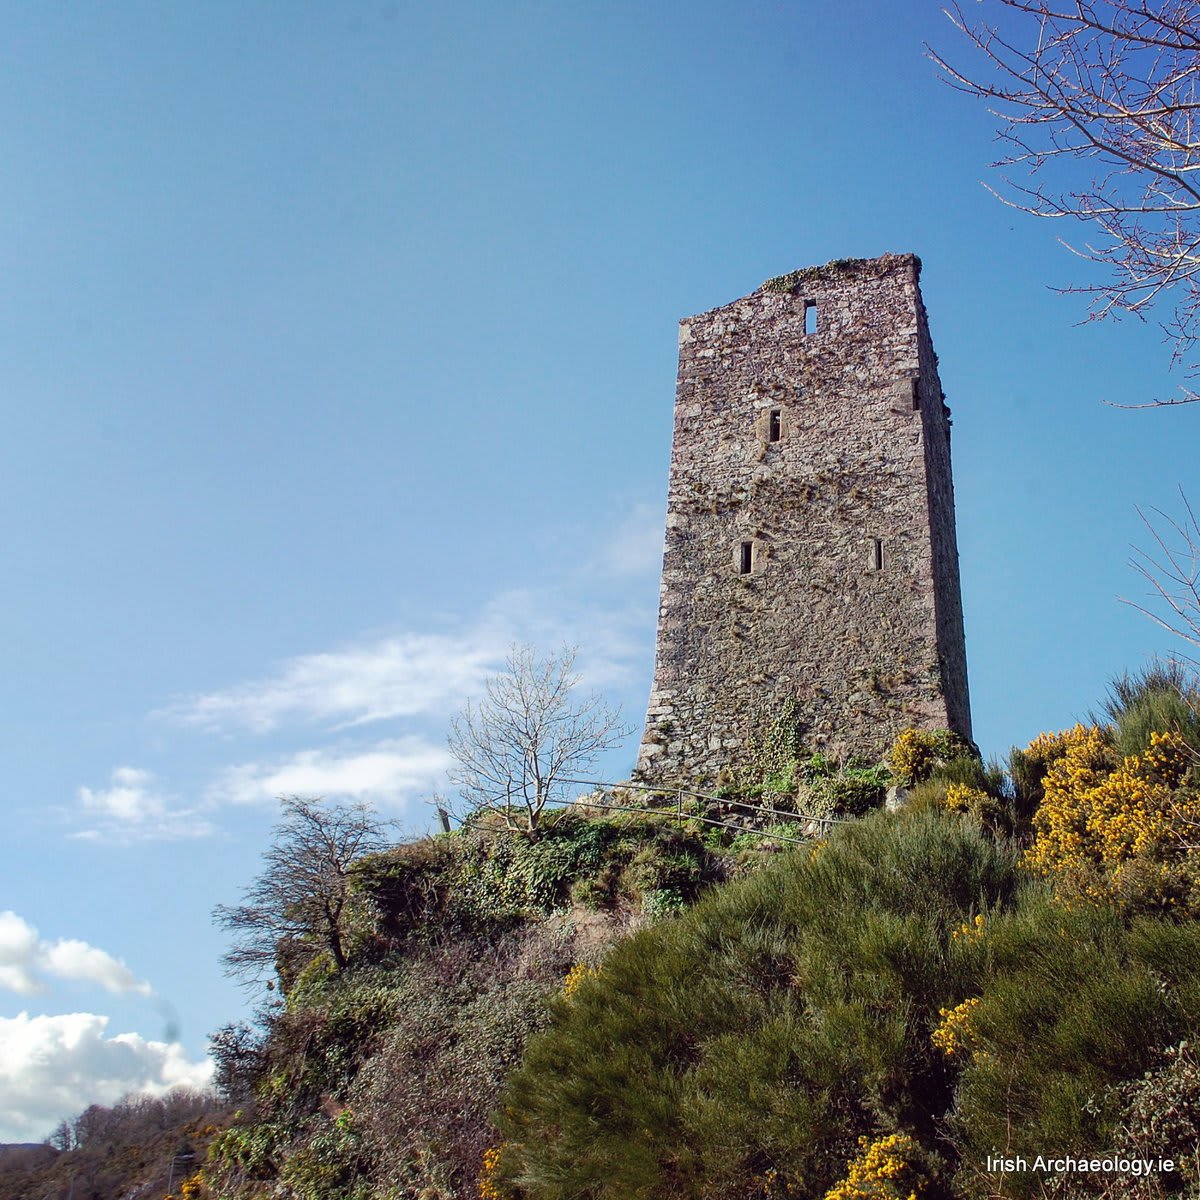 Ferrycarrig castle looking lovely today. This c. 16th century tower was probably built by the Roche family